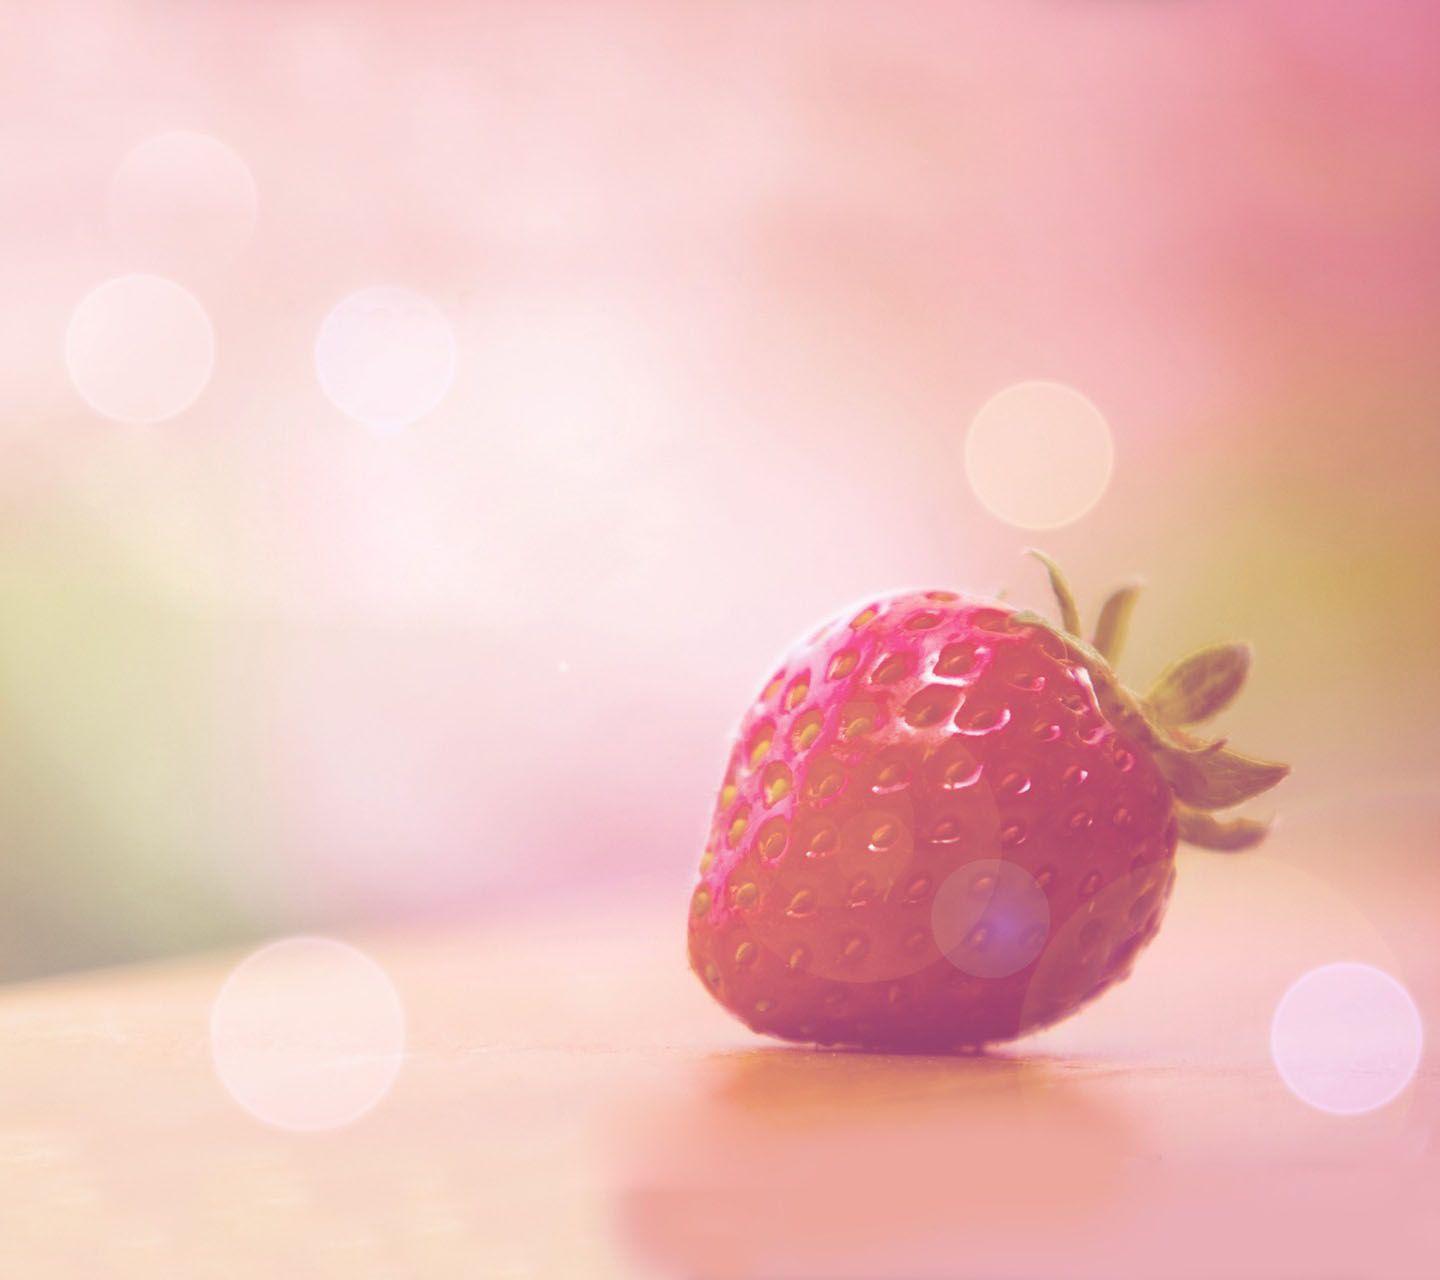 Strawberry Background Vector Art Icons and Graphics for Free Download